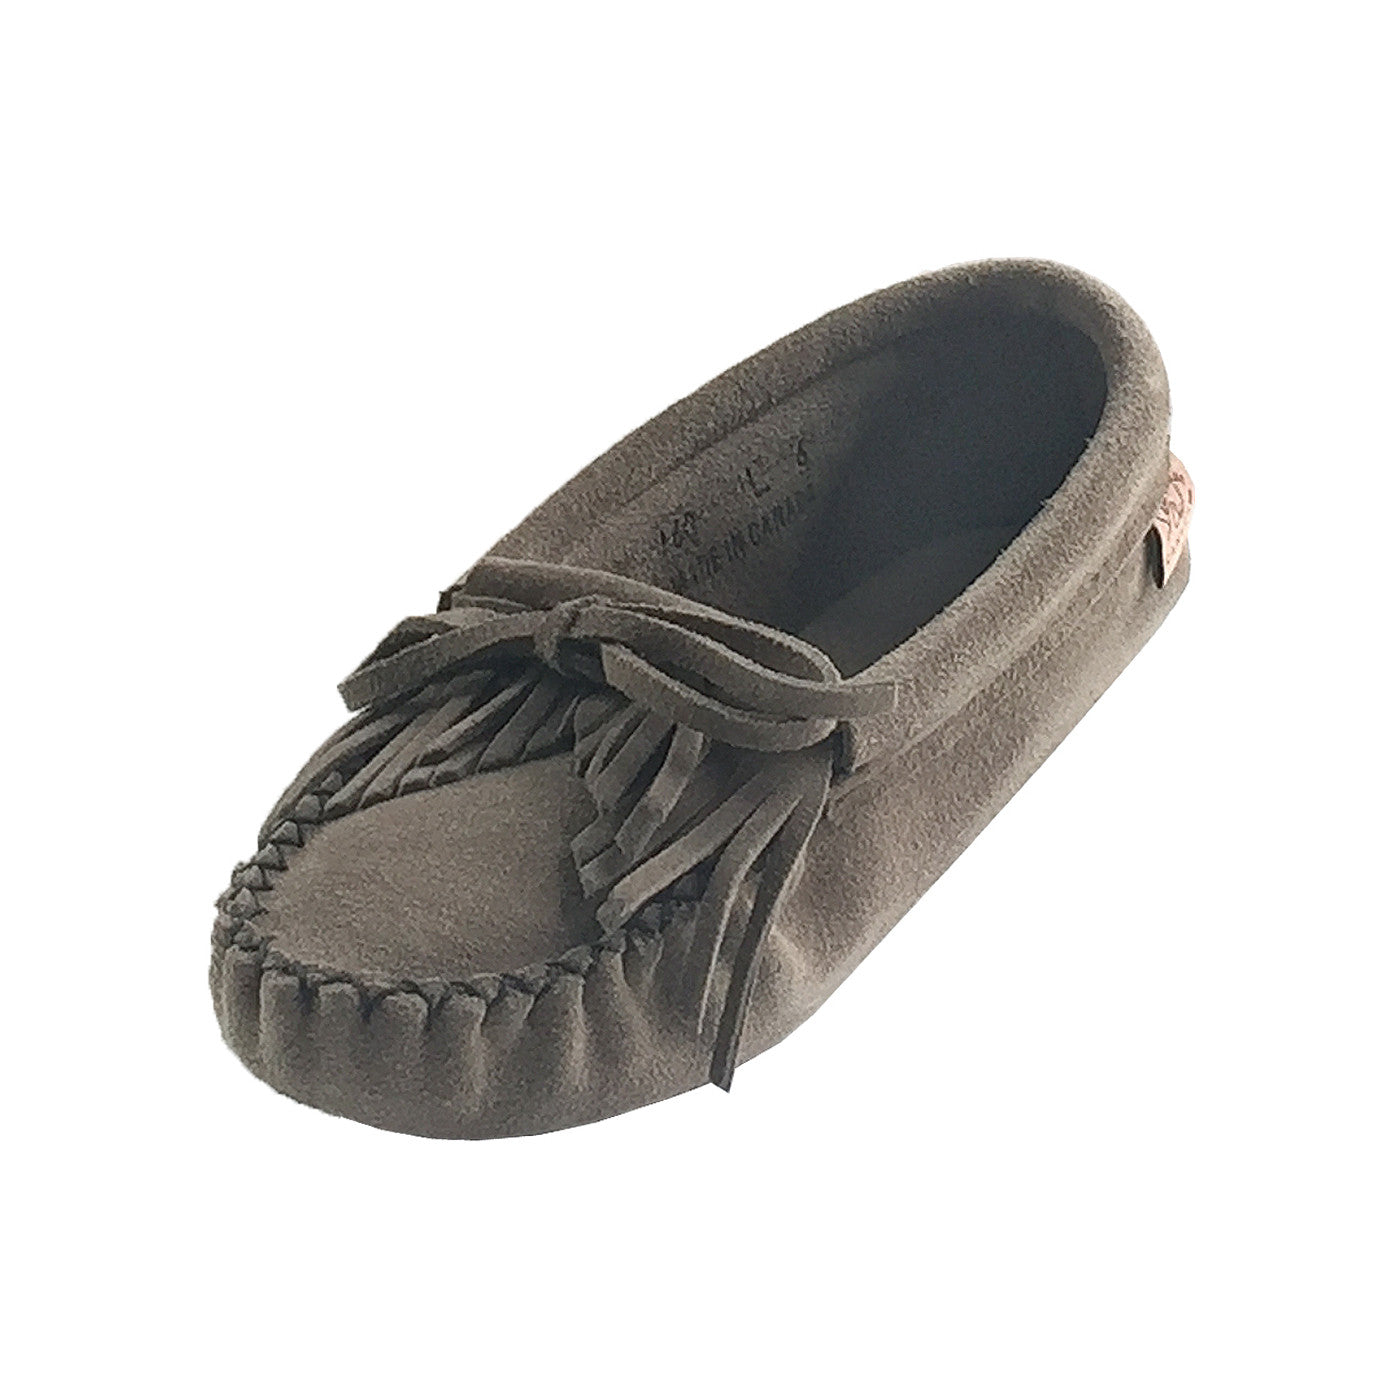 Women's Soft Sole Genuine Suede Moccasin Slippers for Sale Online Leather-Moccasins